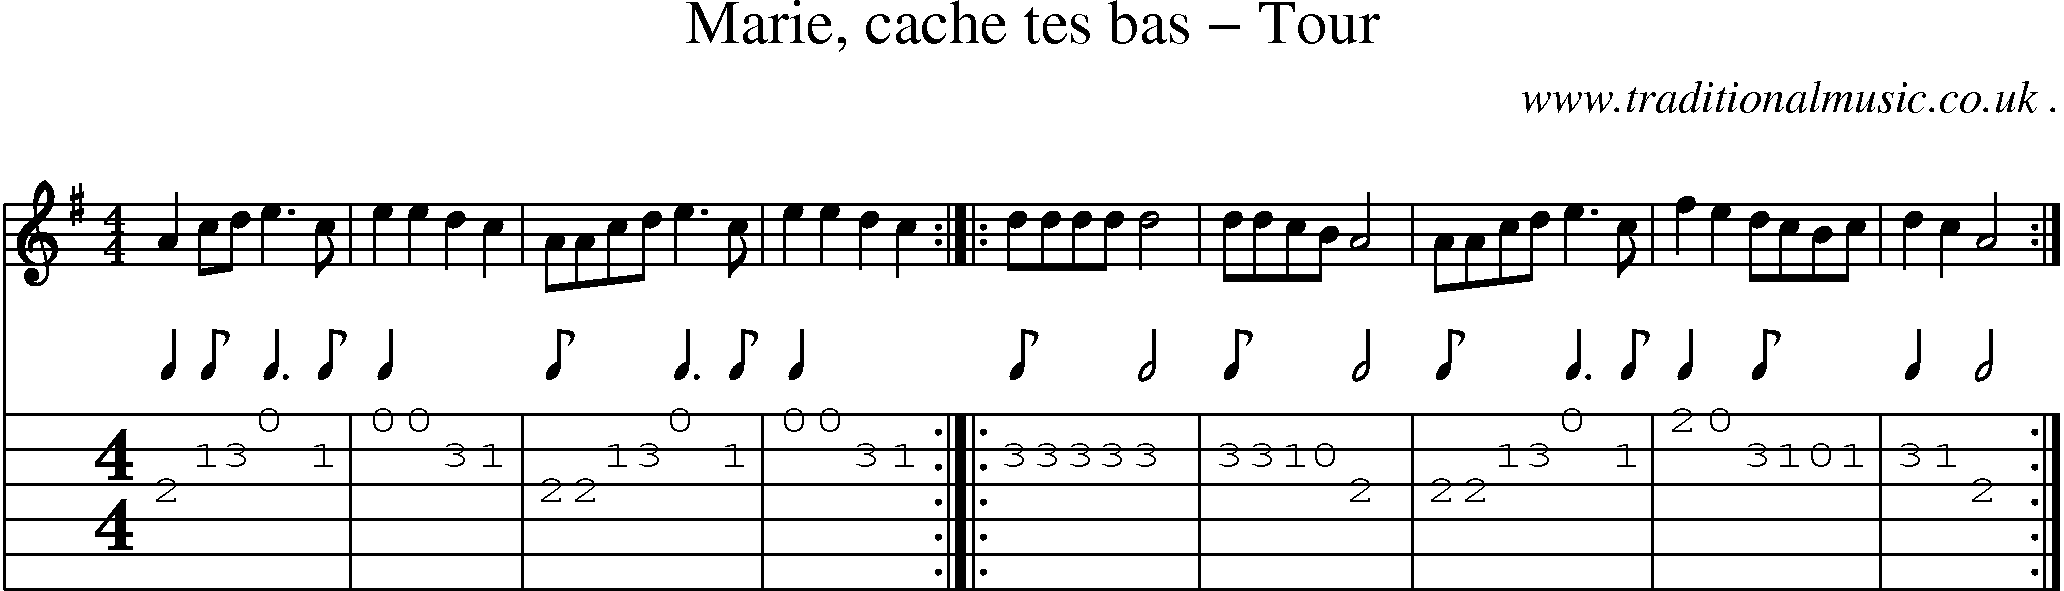 Sheet-Music and Guitar Tabs for Marie Cache Tes Bas Tour